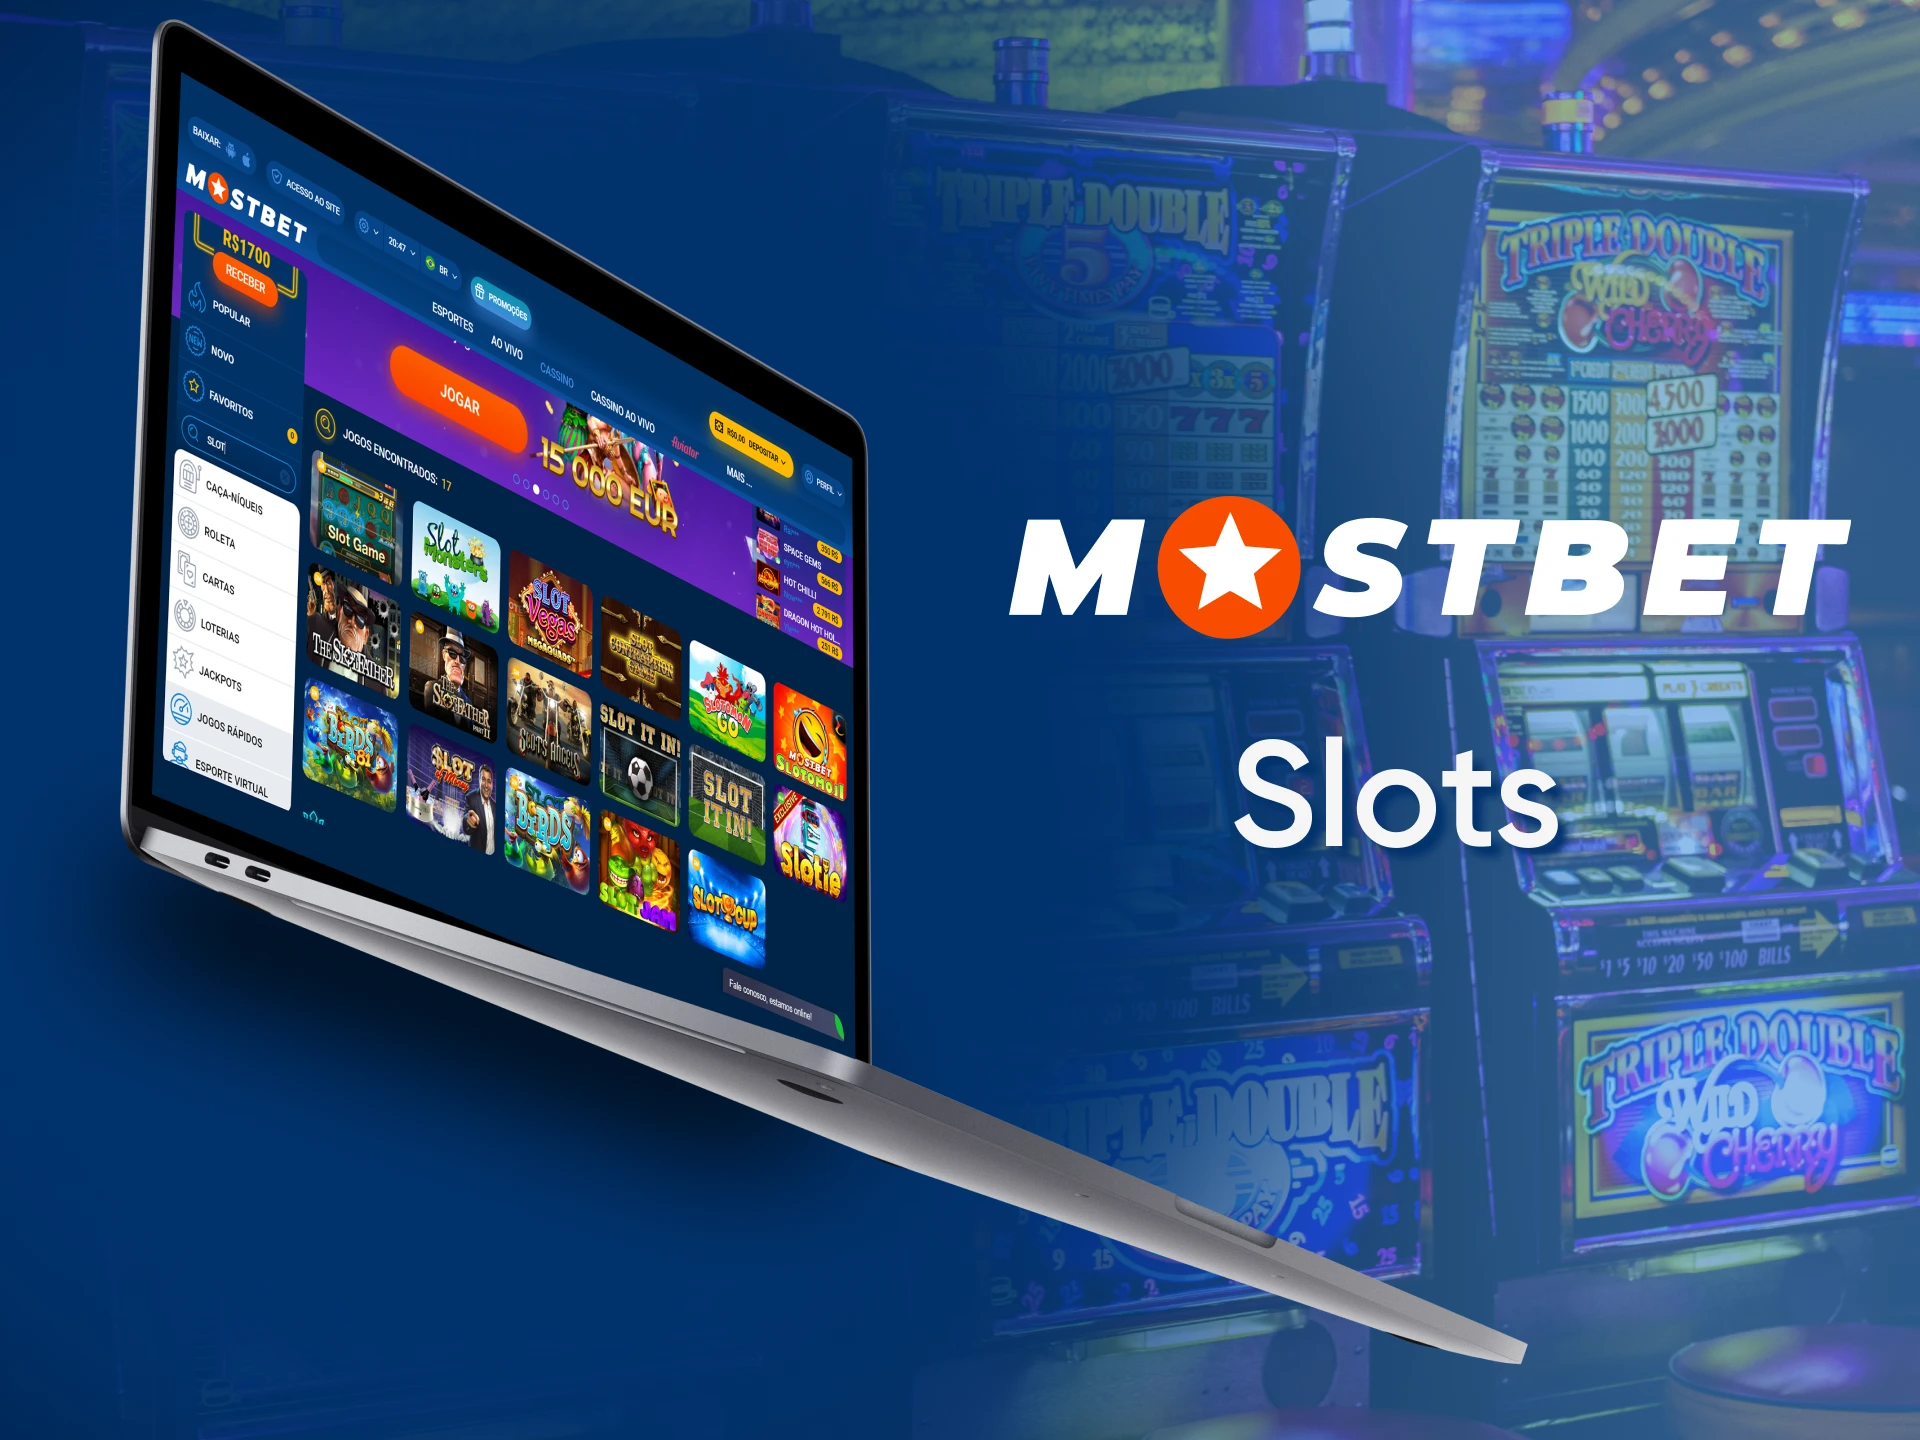 Bet on Mostbet slots.